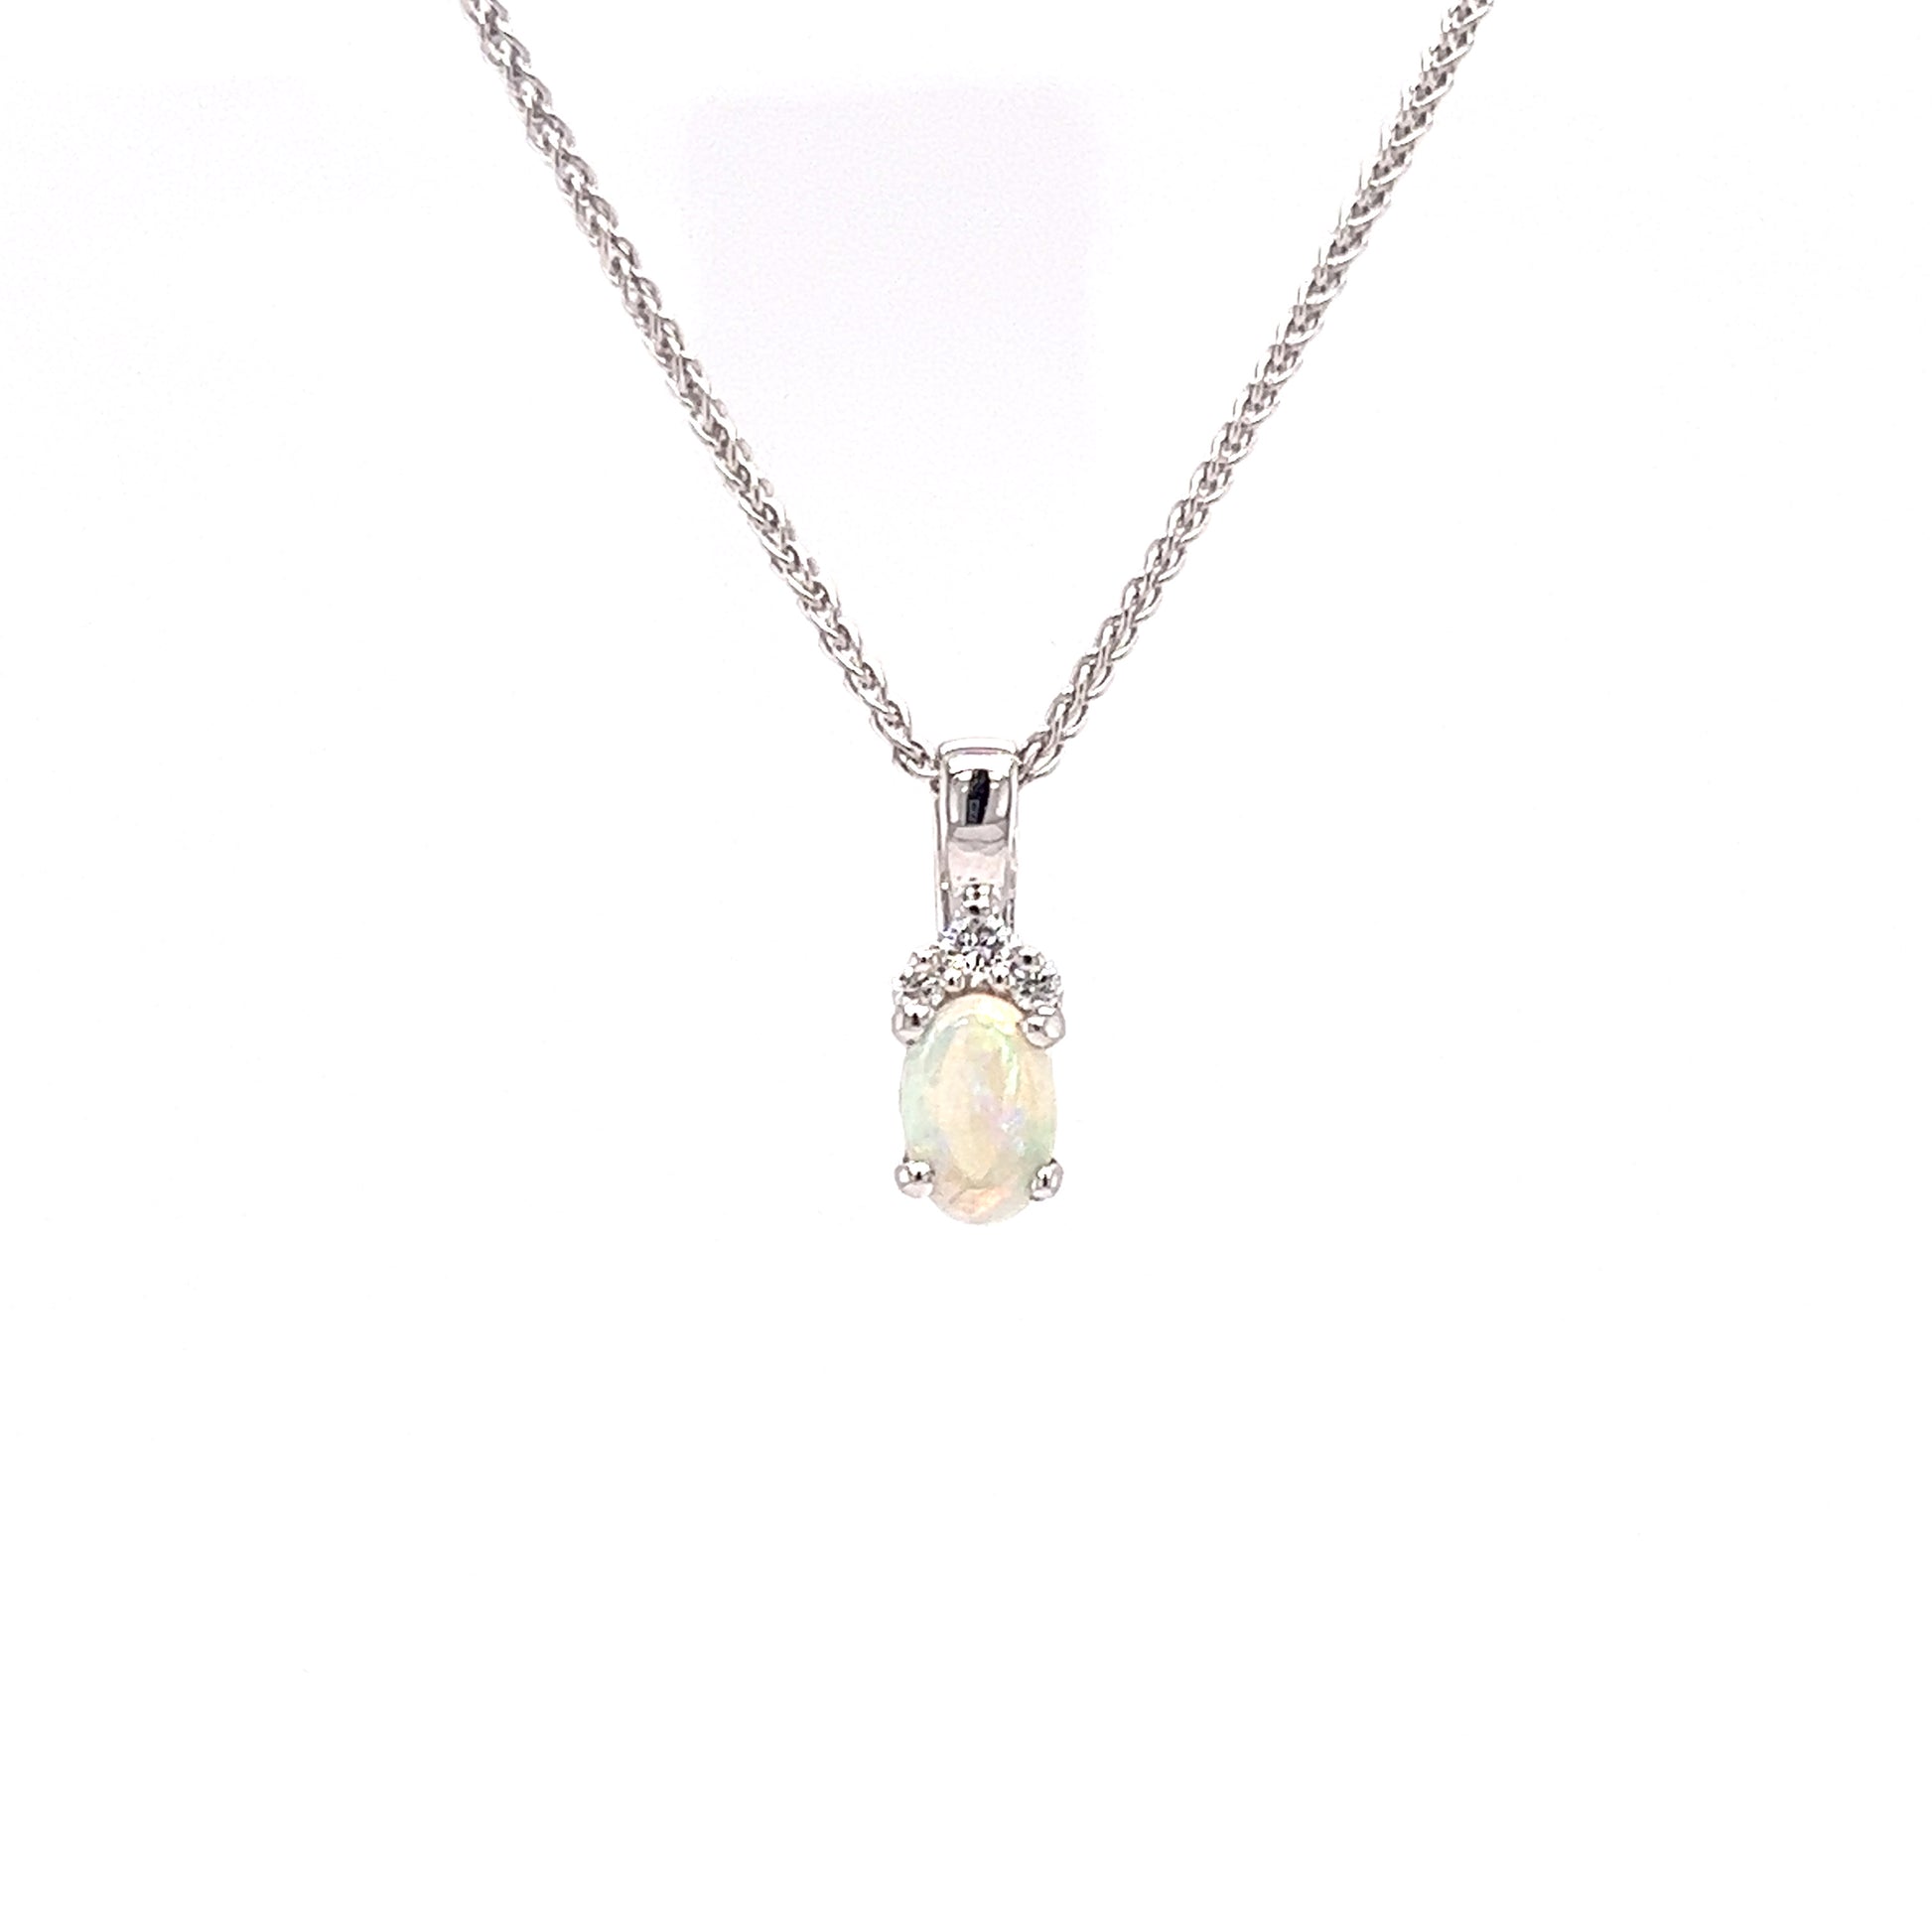 Australian White Opal with Three Diamonds in 14k White Gold Front View with Chain